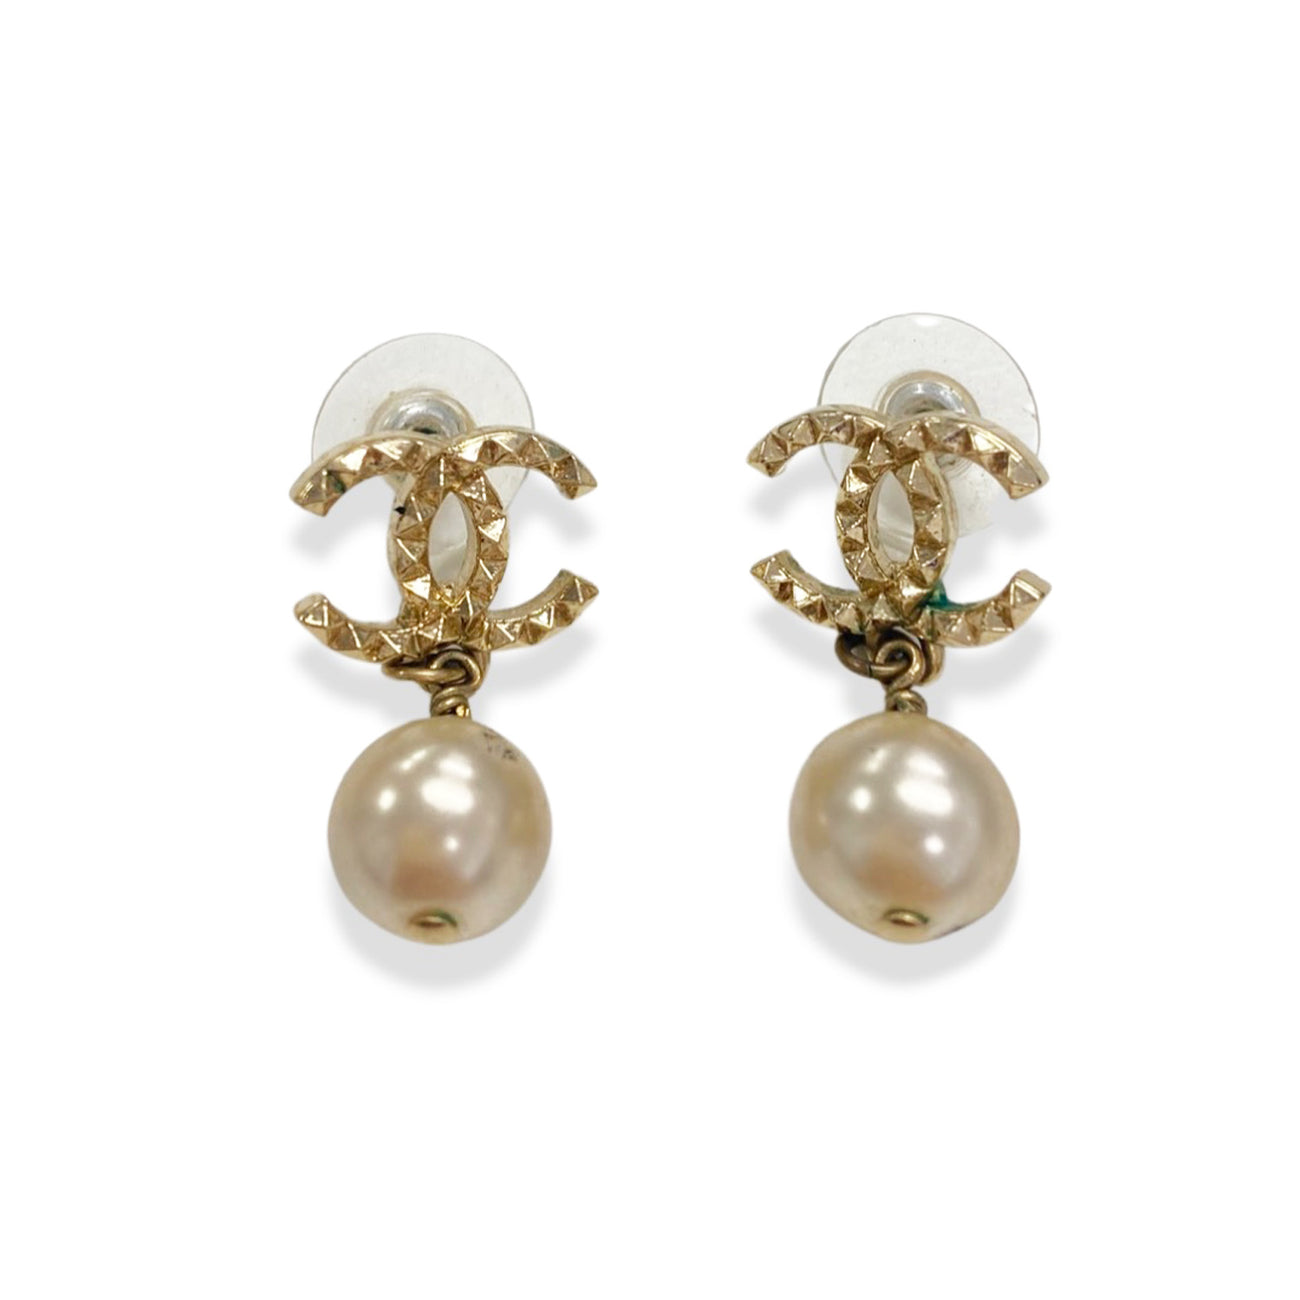 Chanel - Authenticated Earrings - Pearl Gold for Women, Good Condition